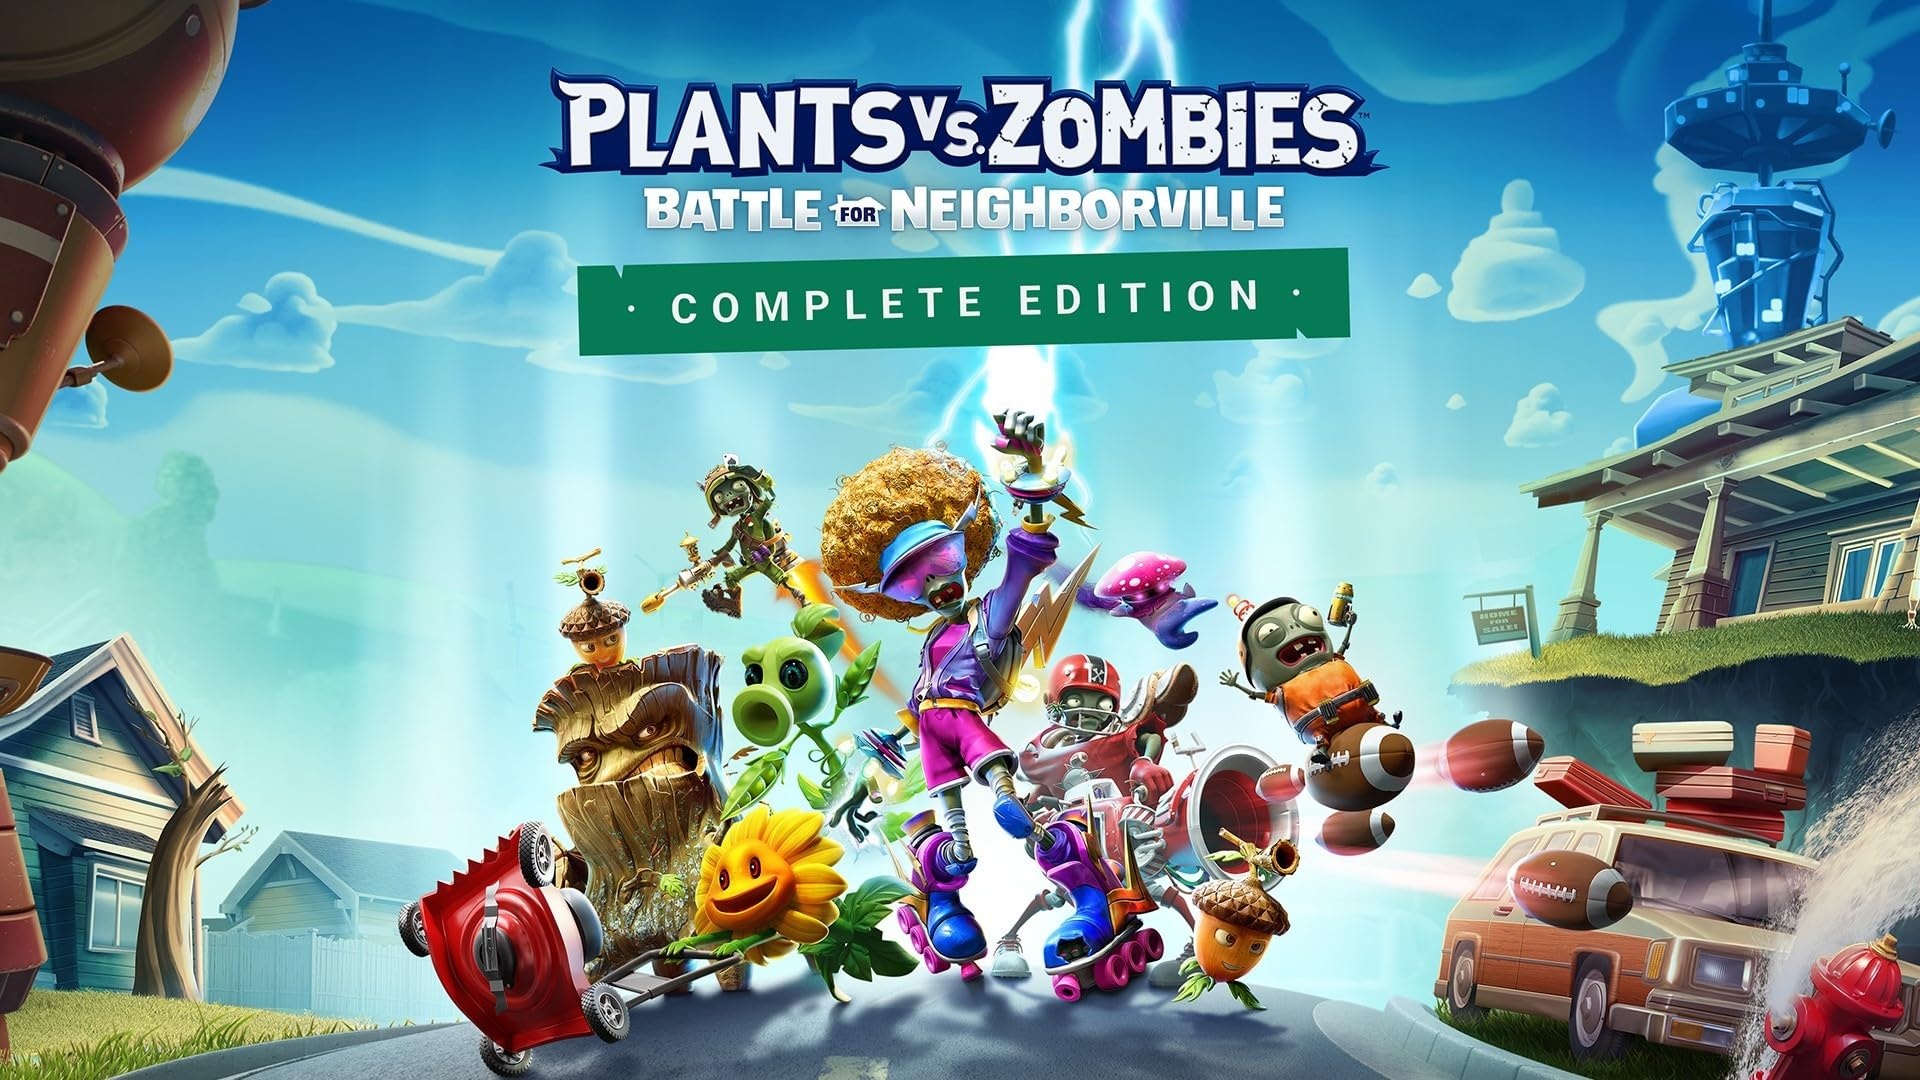 Plants vs. Zombies: Battle for Neighborville Complete Edition (Nintendo Switch)